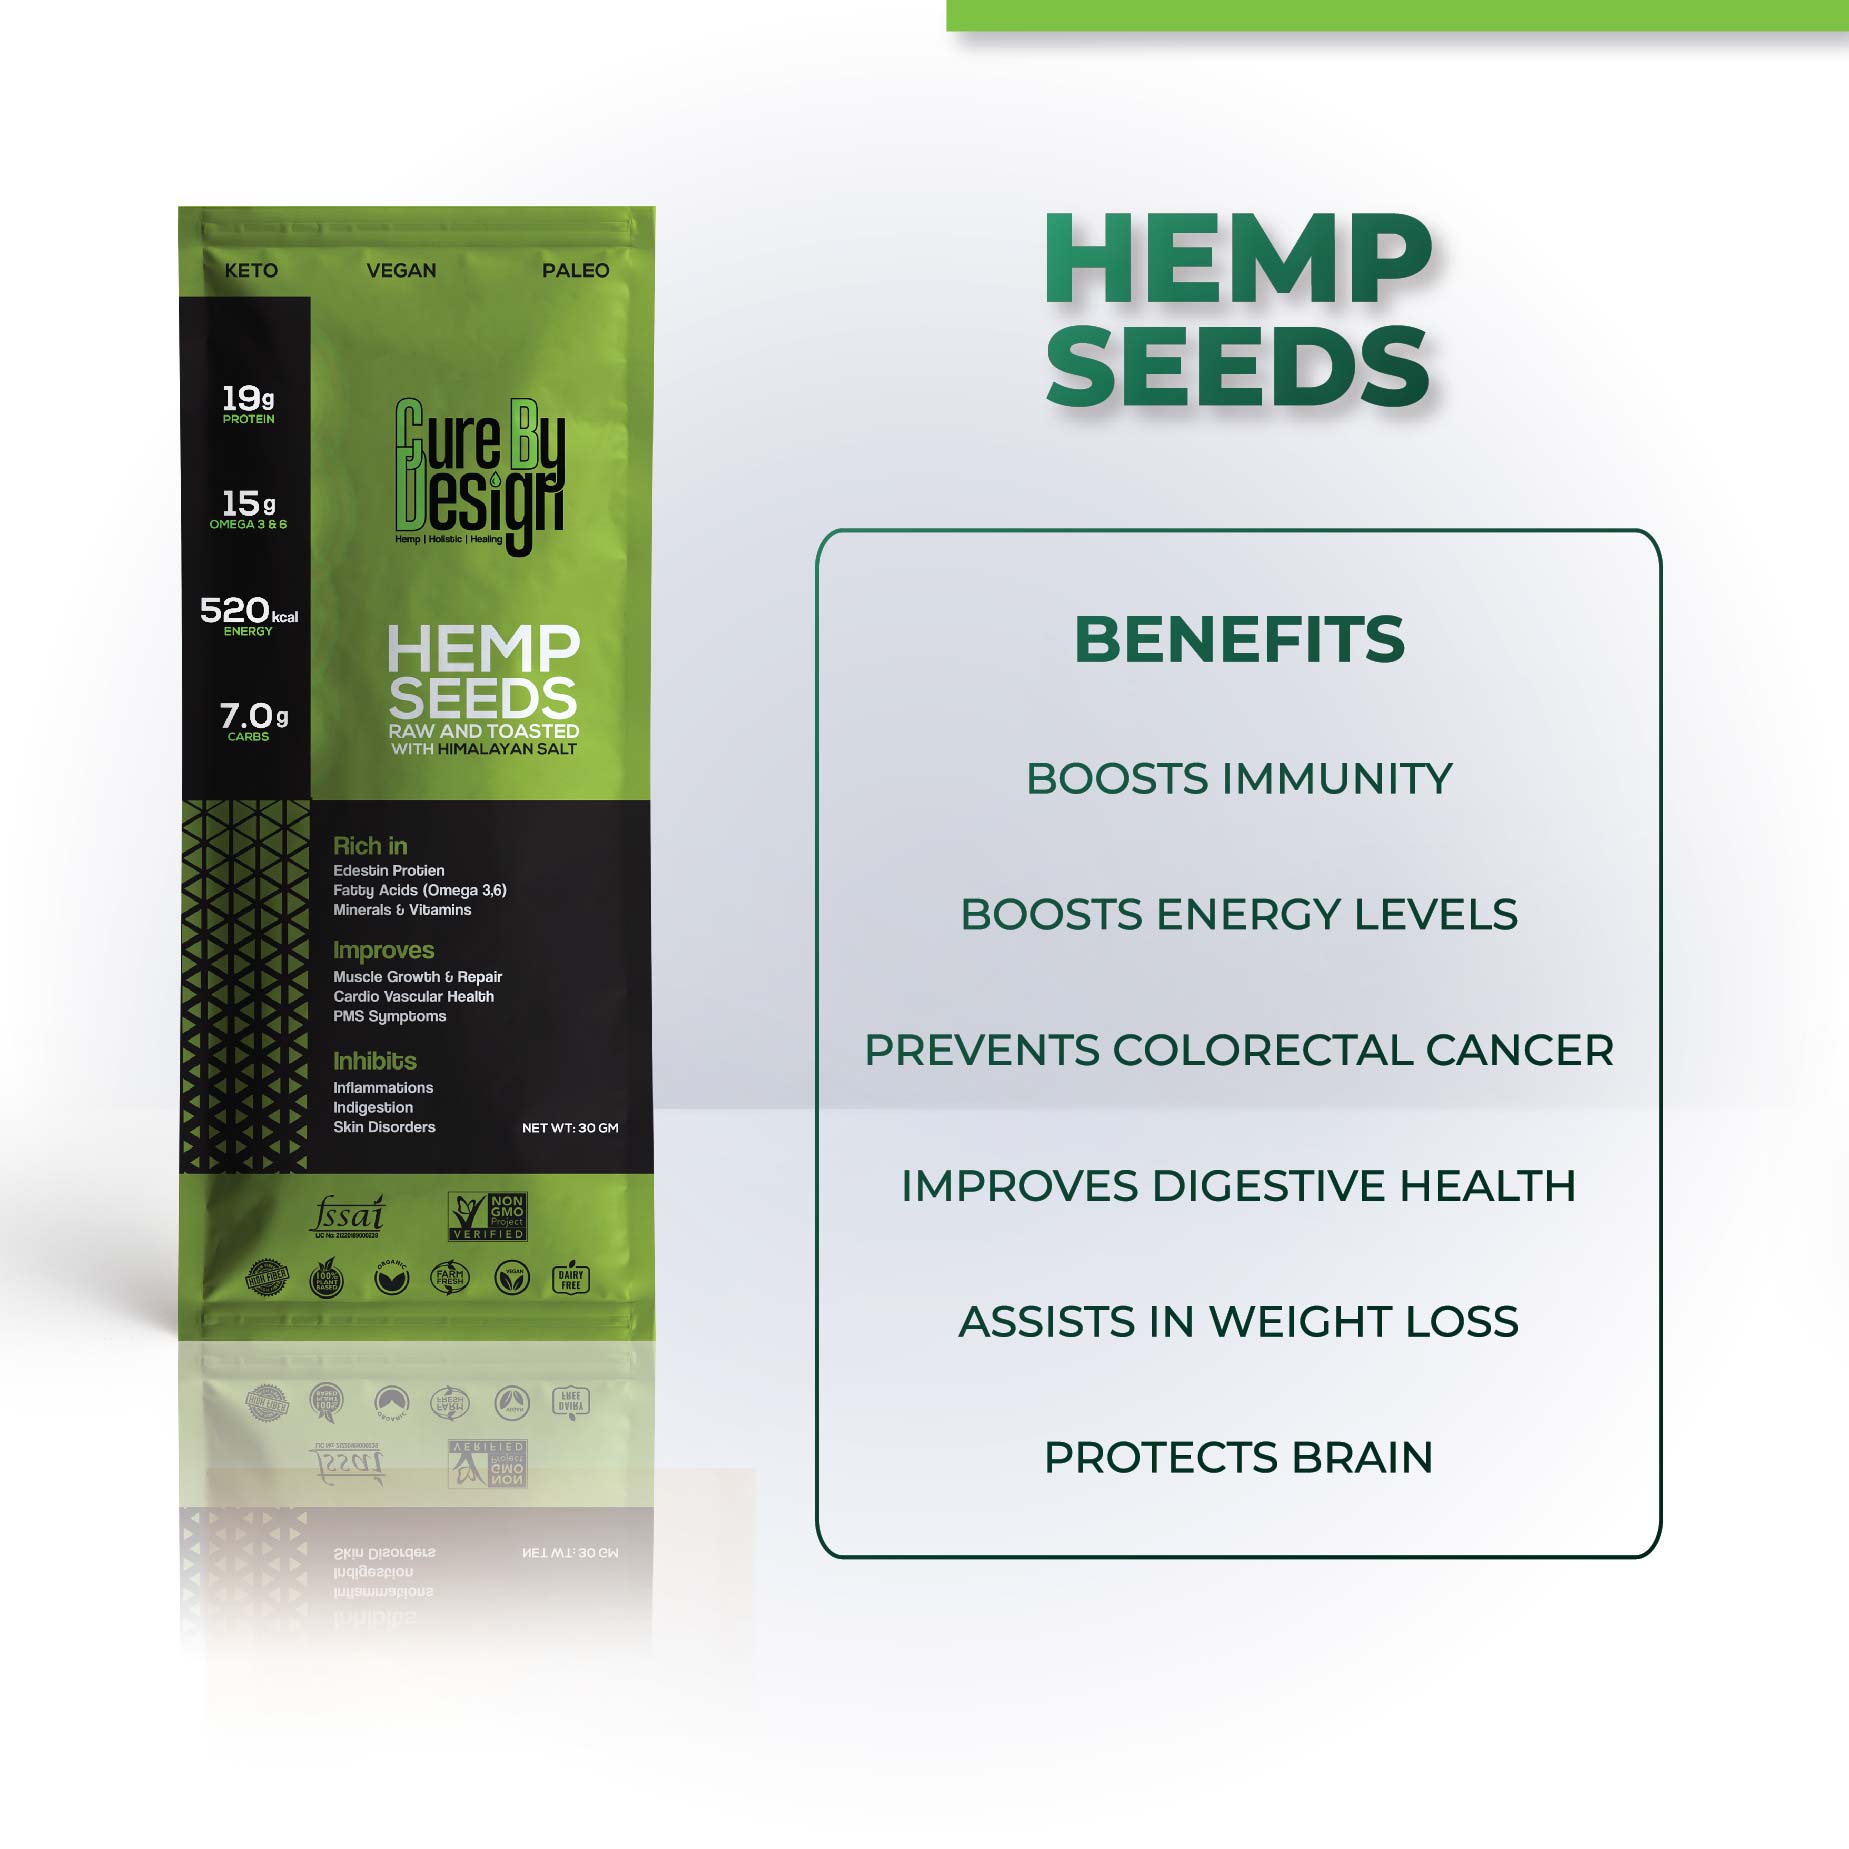 Cure By Design Hemp Seed Toasted with Himalayan Pink Salt